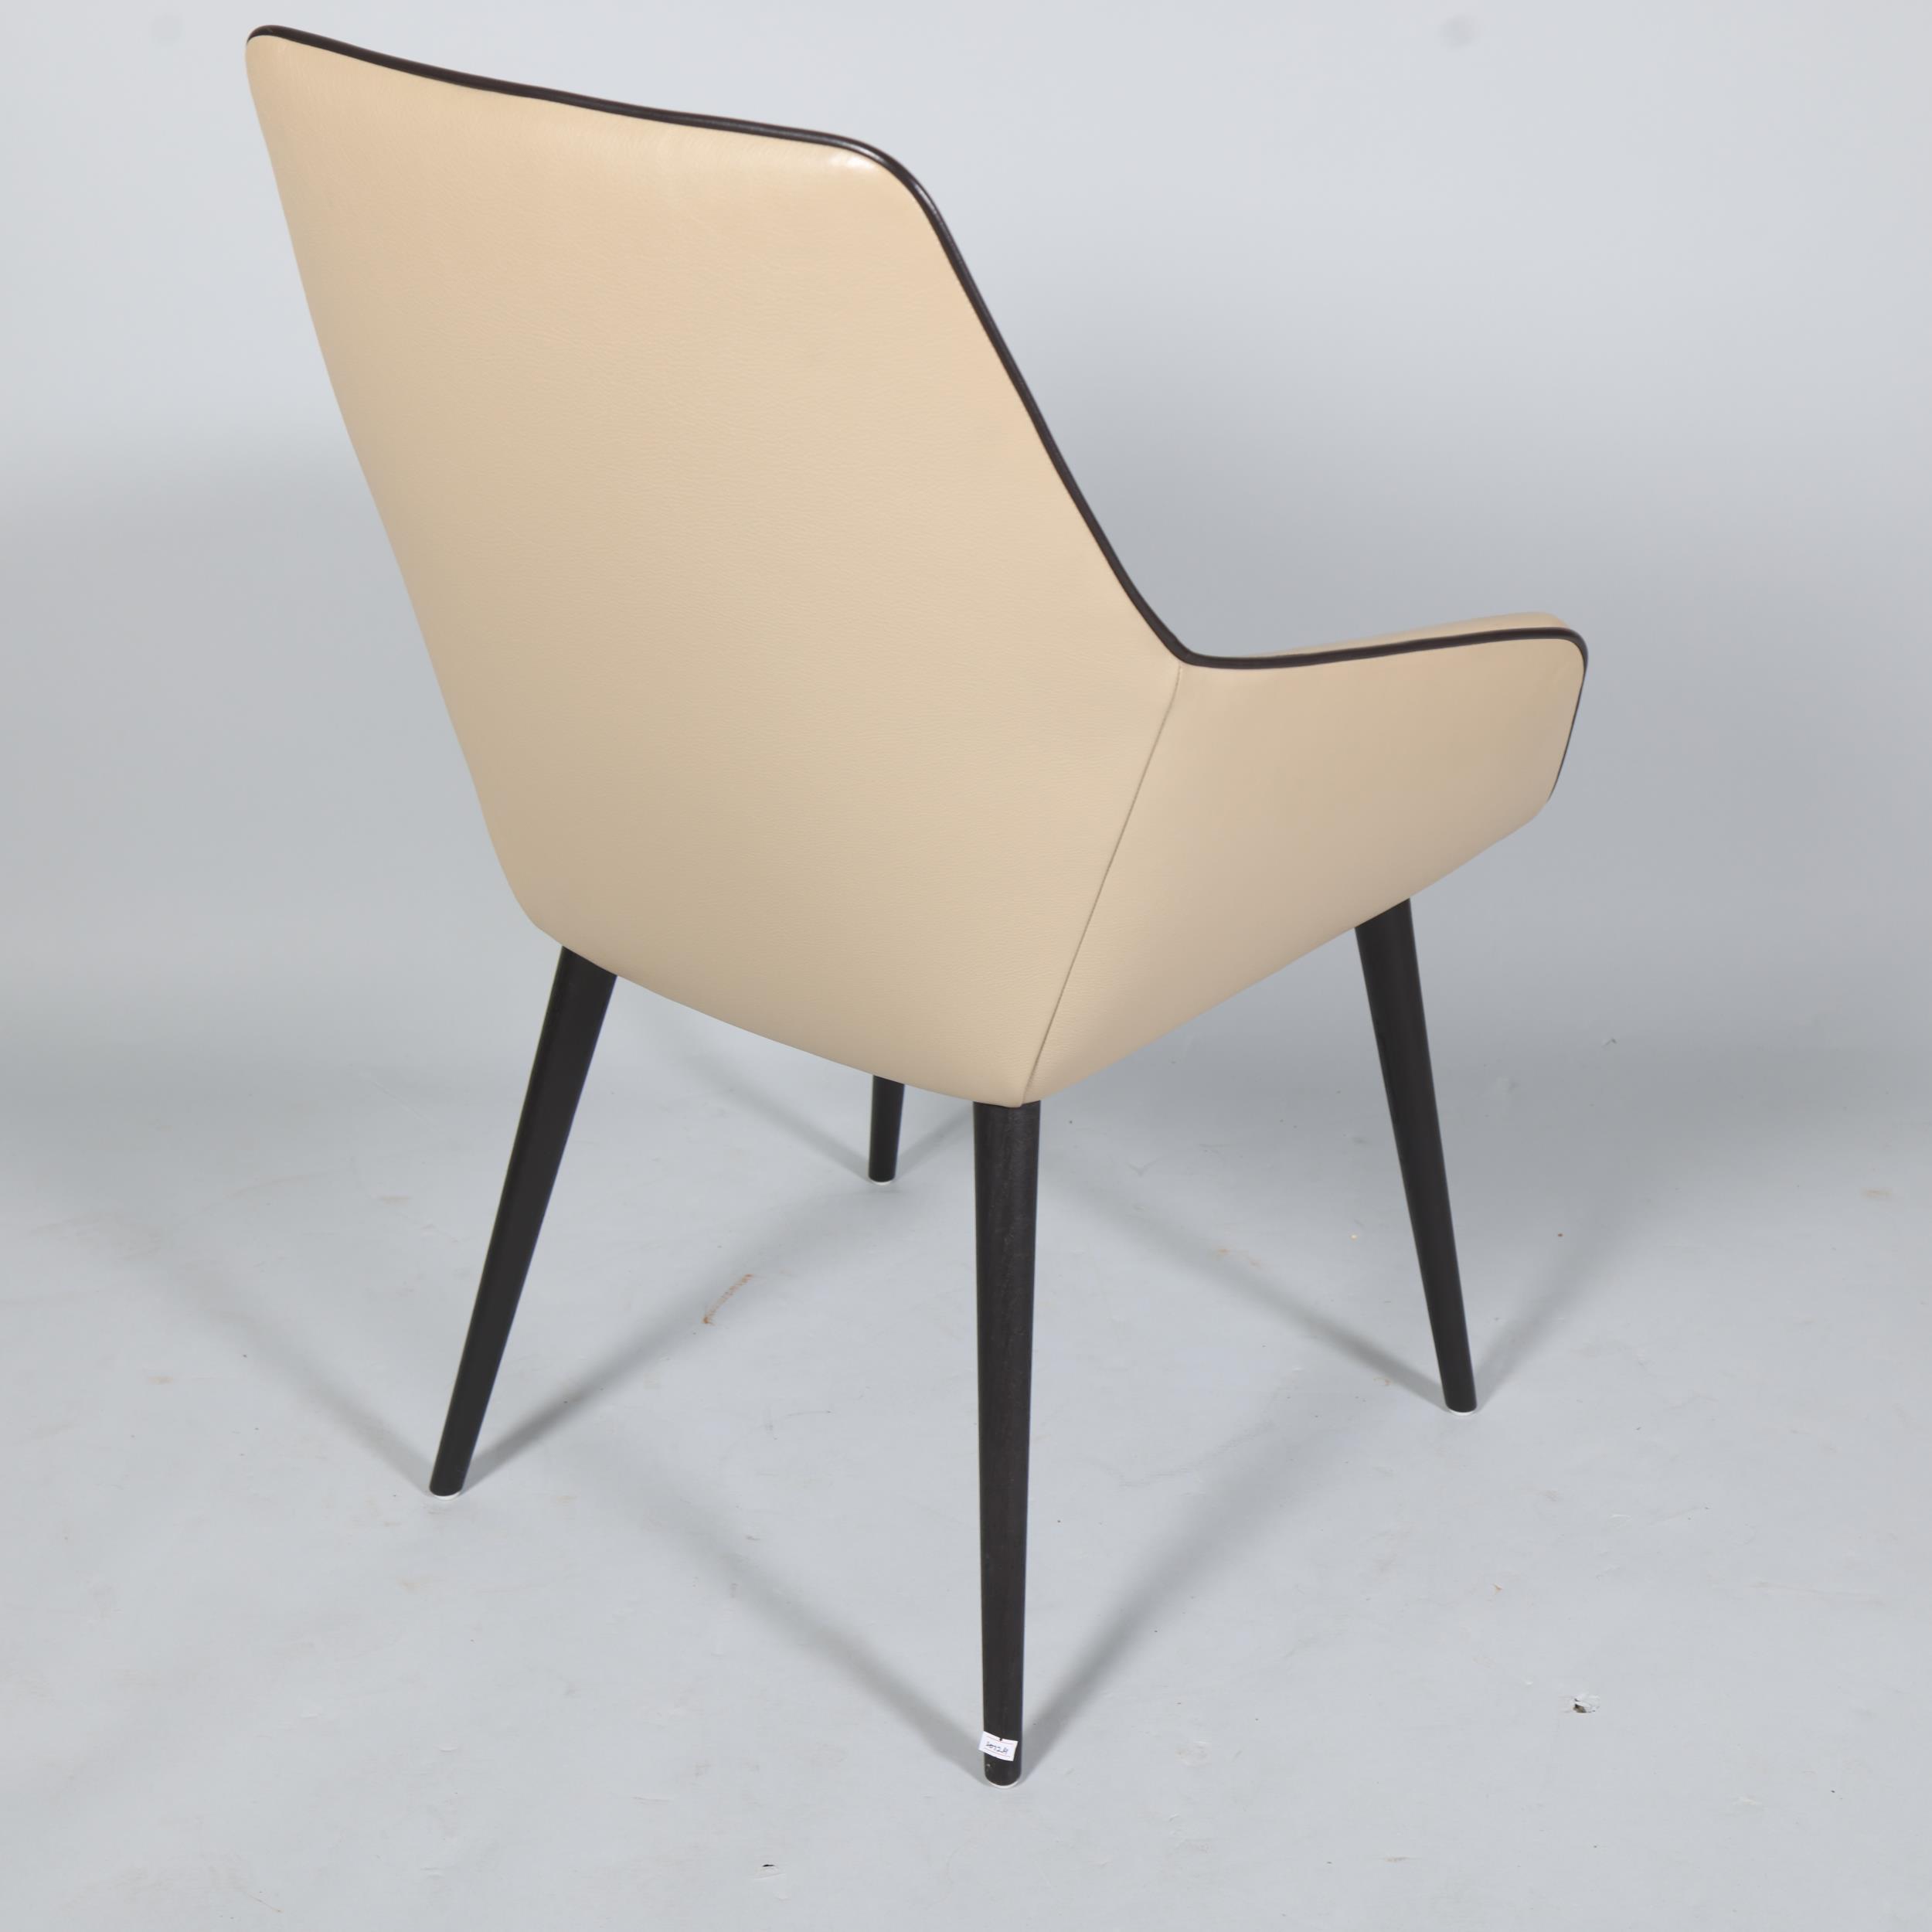 Jehs and Laub, a contemporary design Ray Soft armchair in fine leather by Brunner, Germany, with - Image 3 of 3